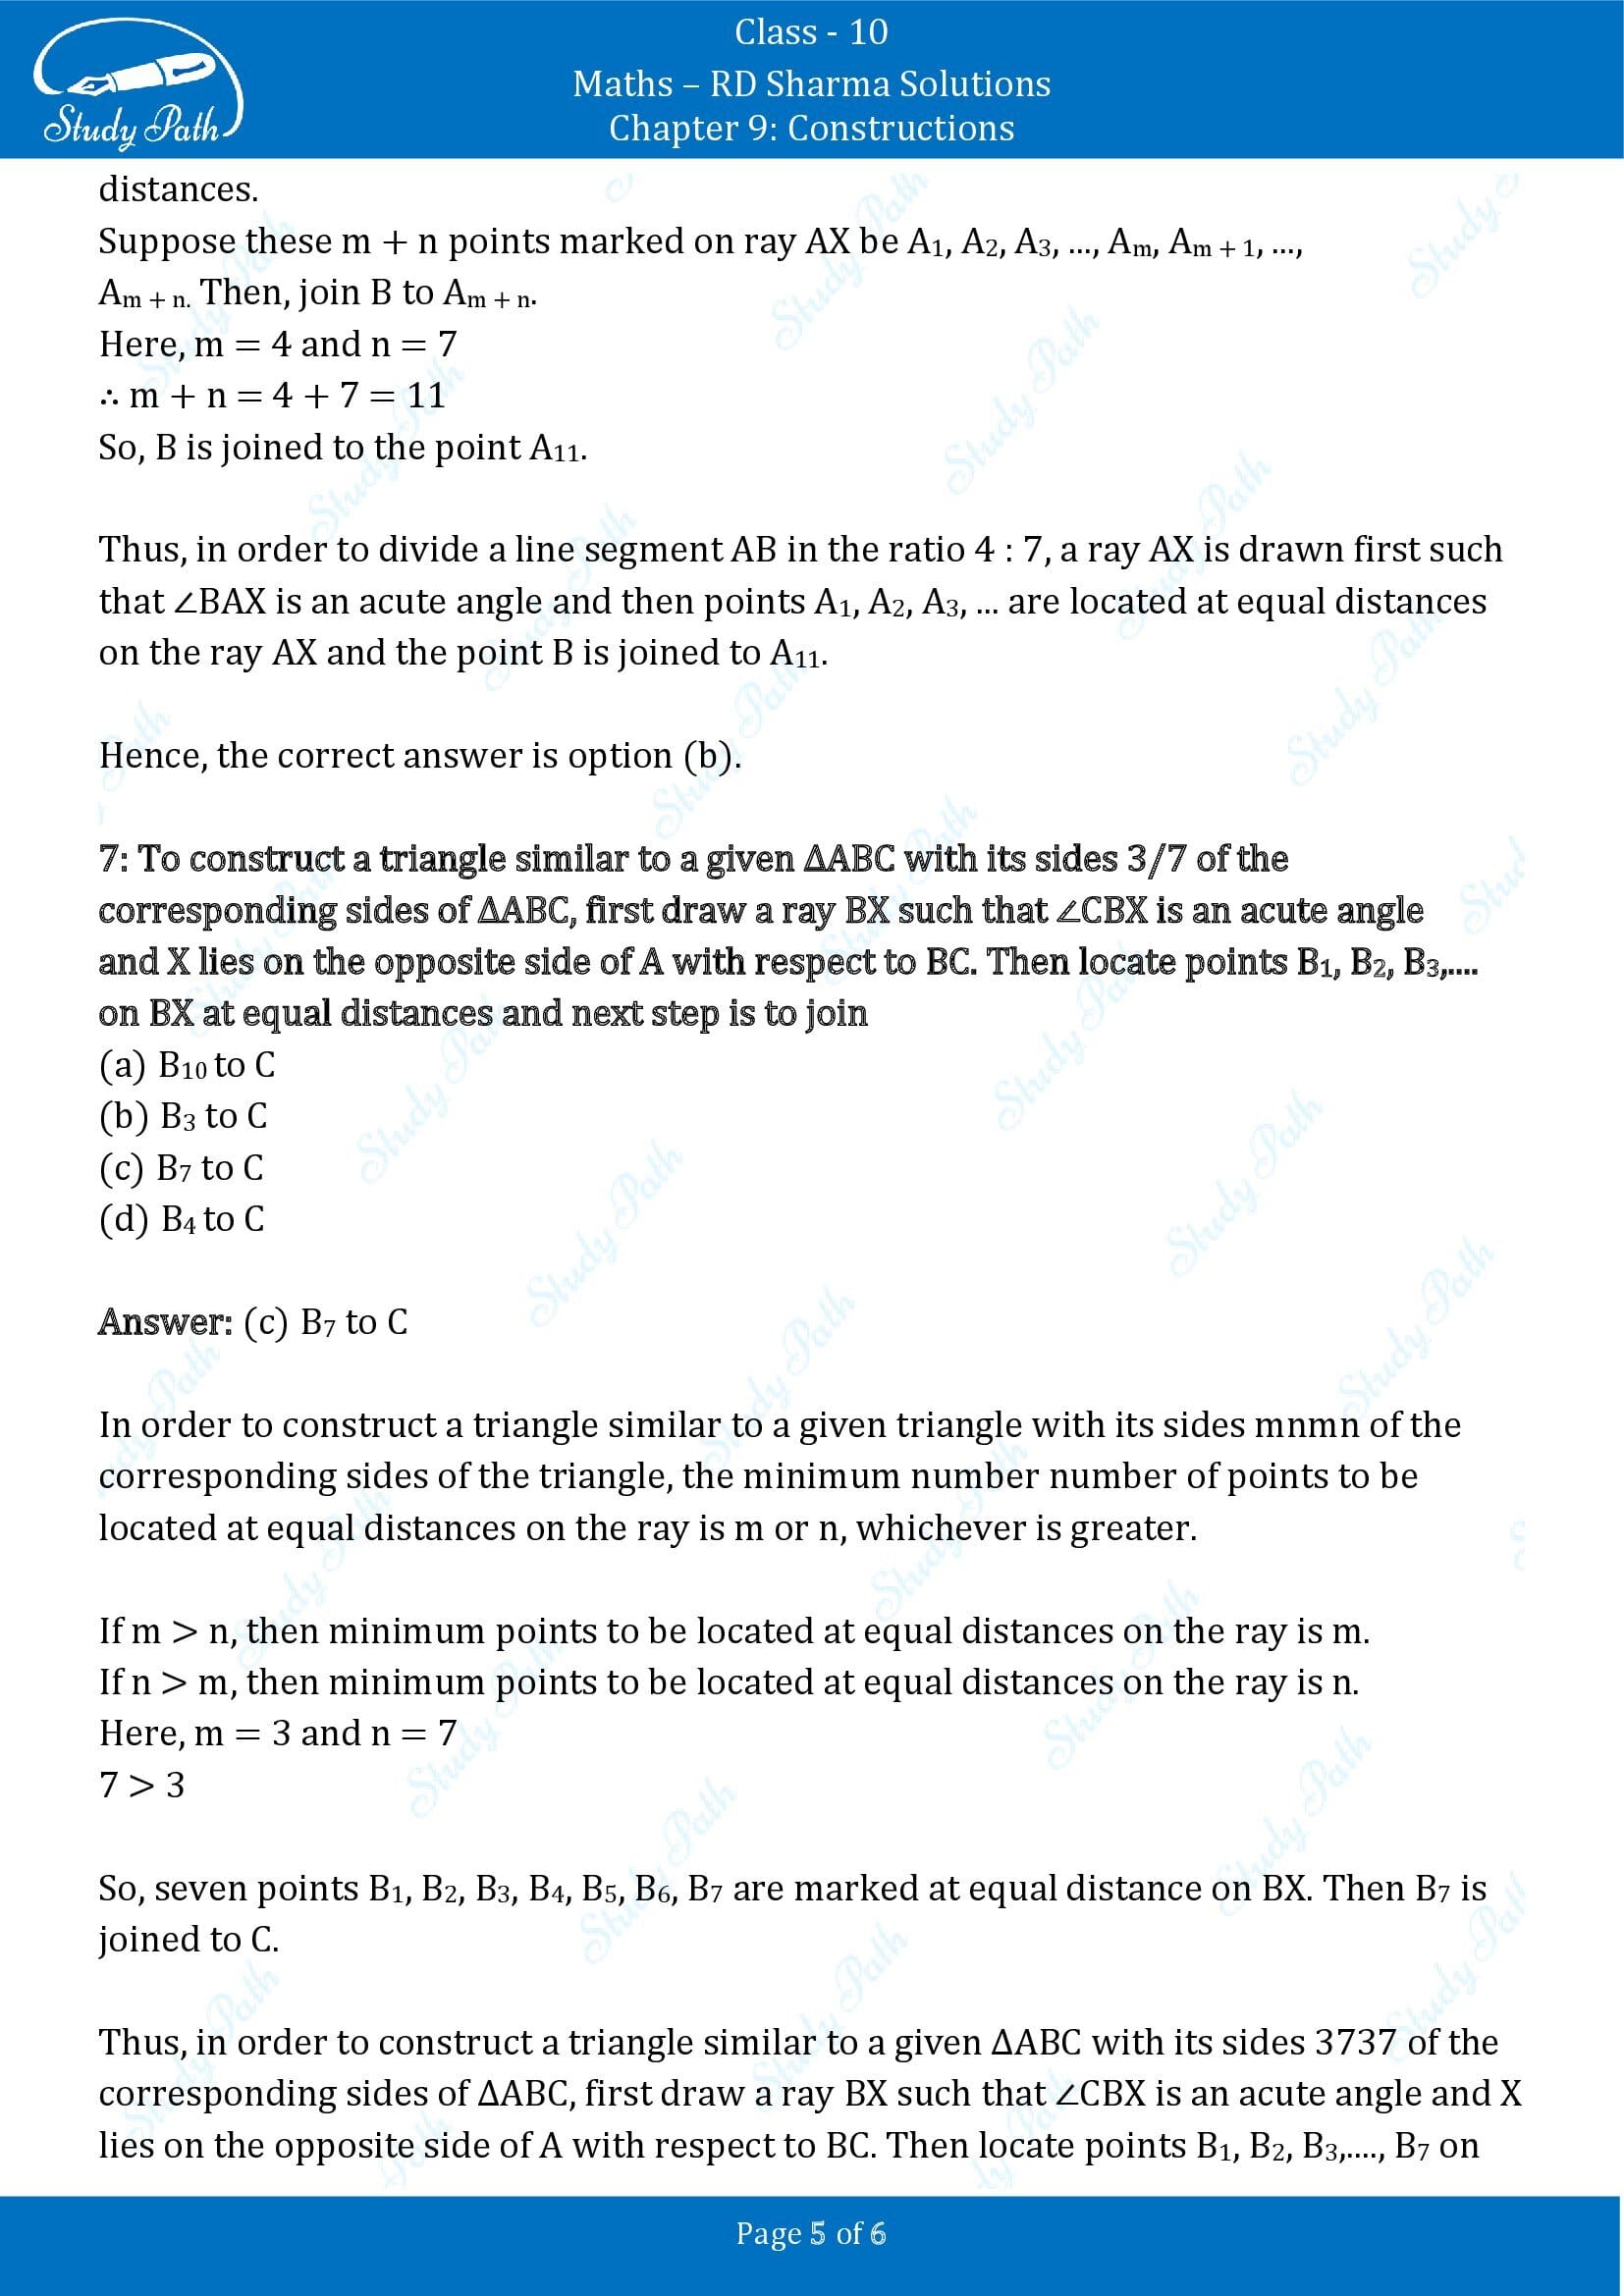 RD Sharma Solutions Class 10 Chapter 9 Constructions Multiple Choice Question MCQs 00005